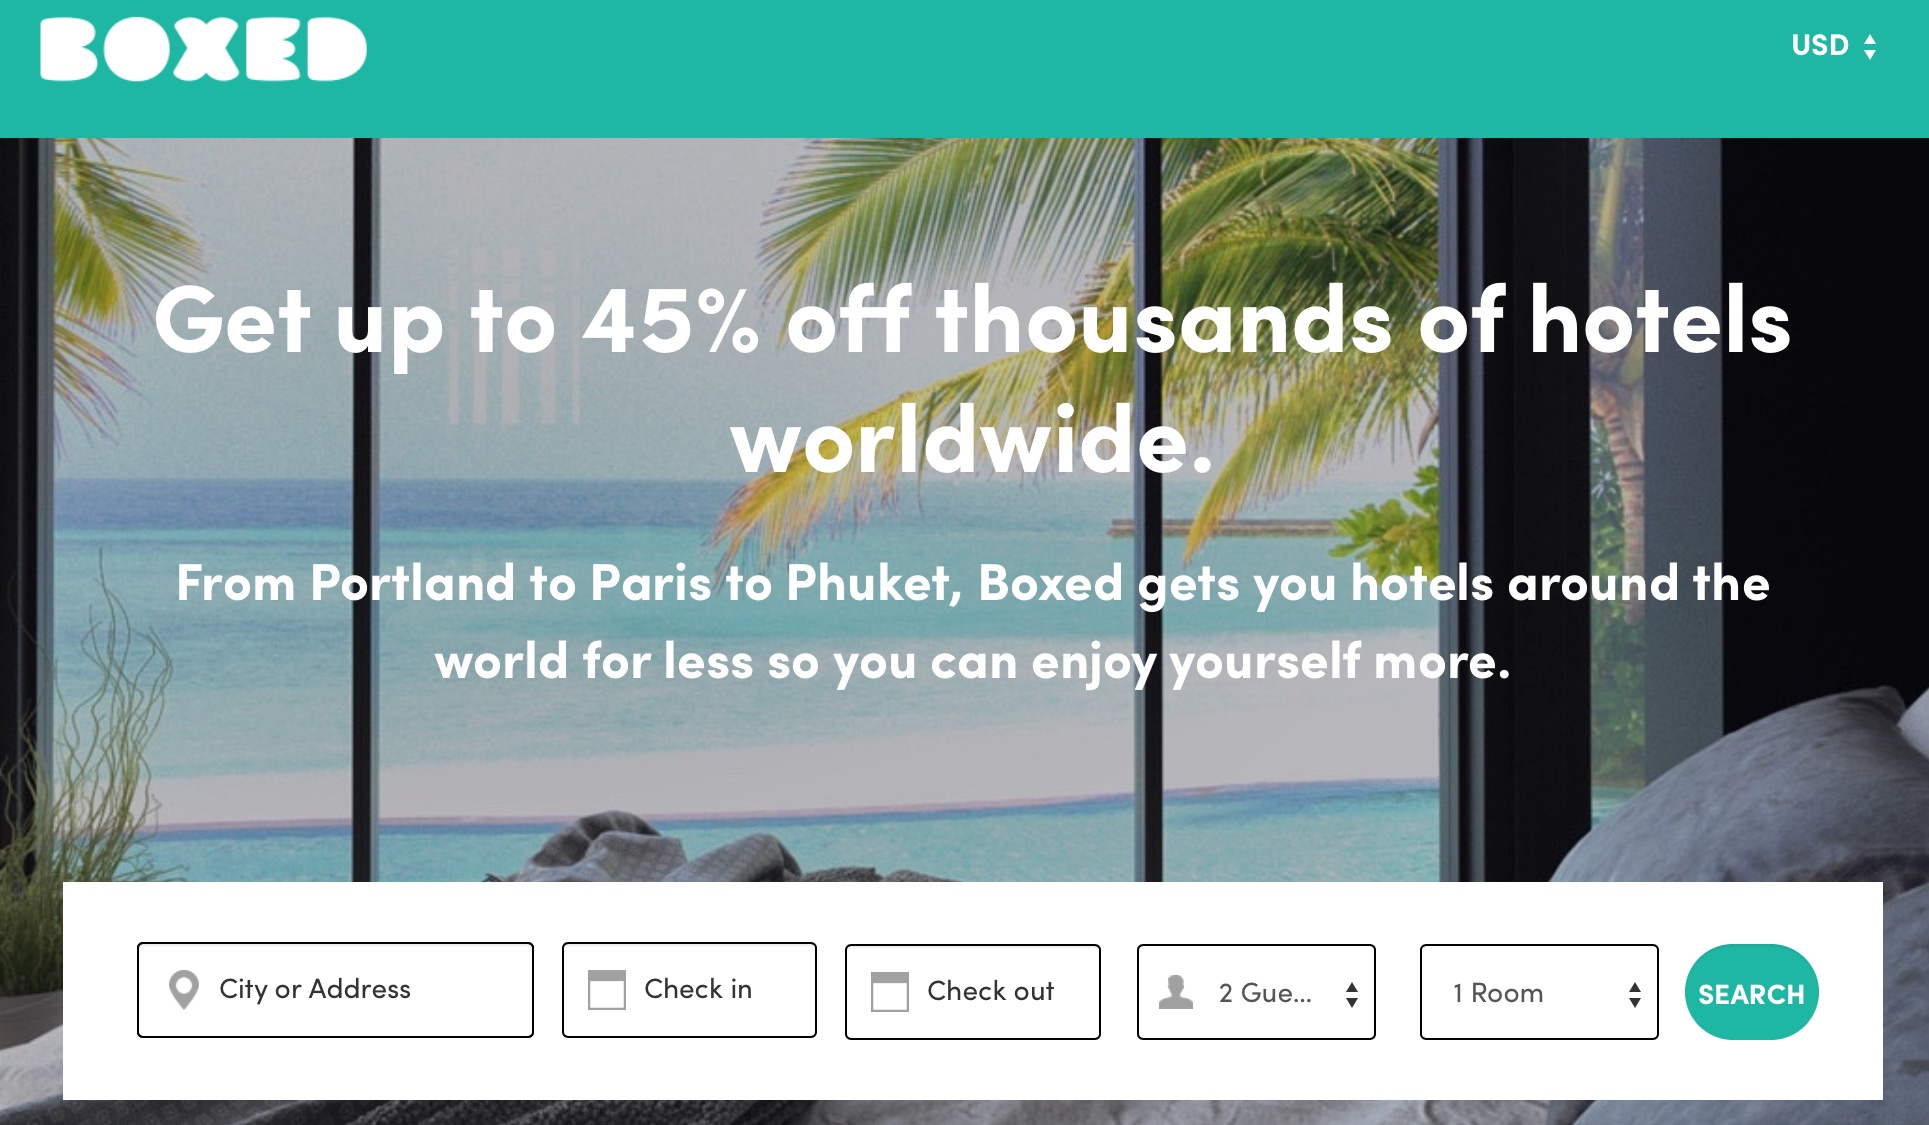 Boxed Hotels: Save Up to 45% On Hotels Worldwide